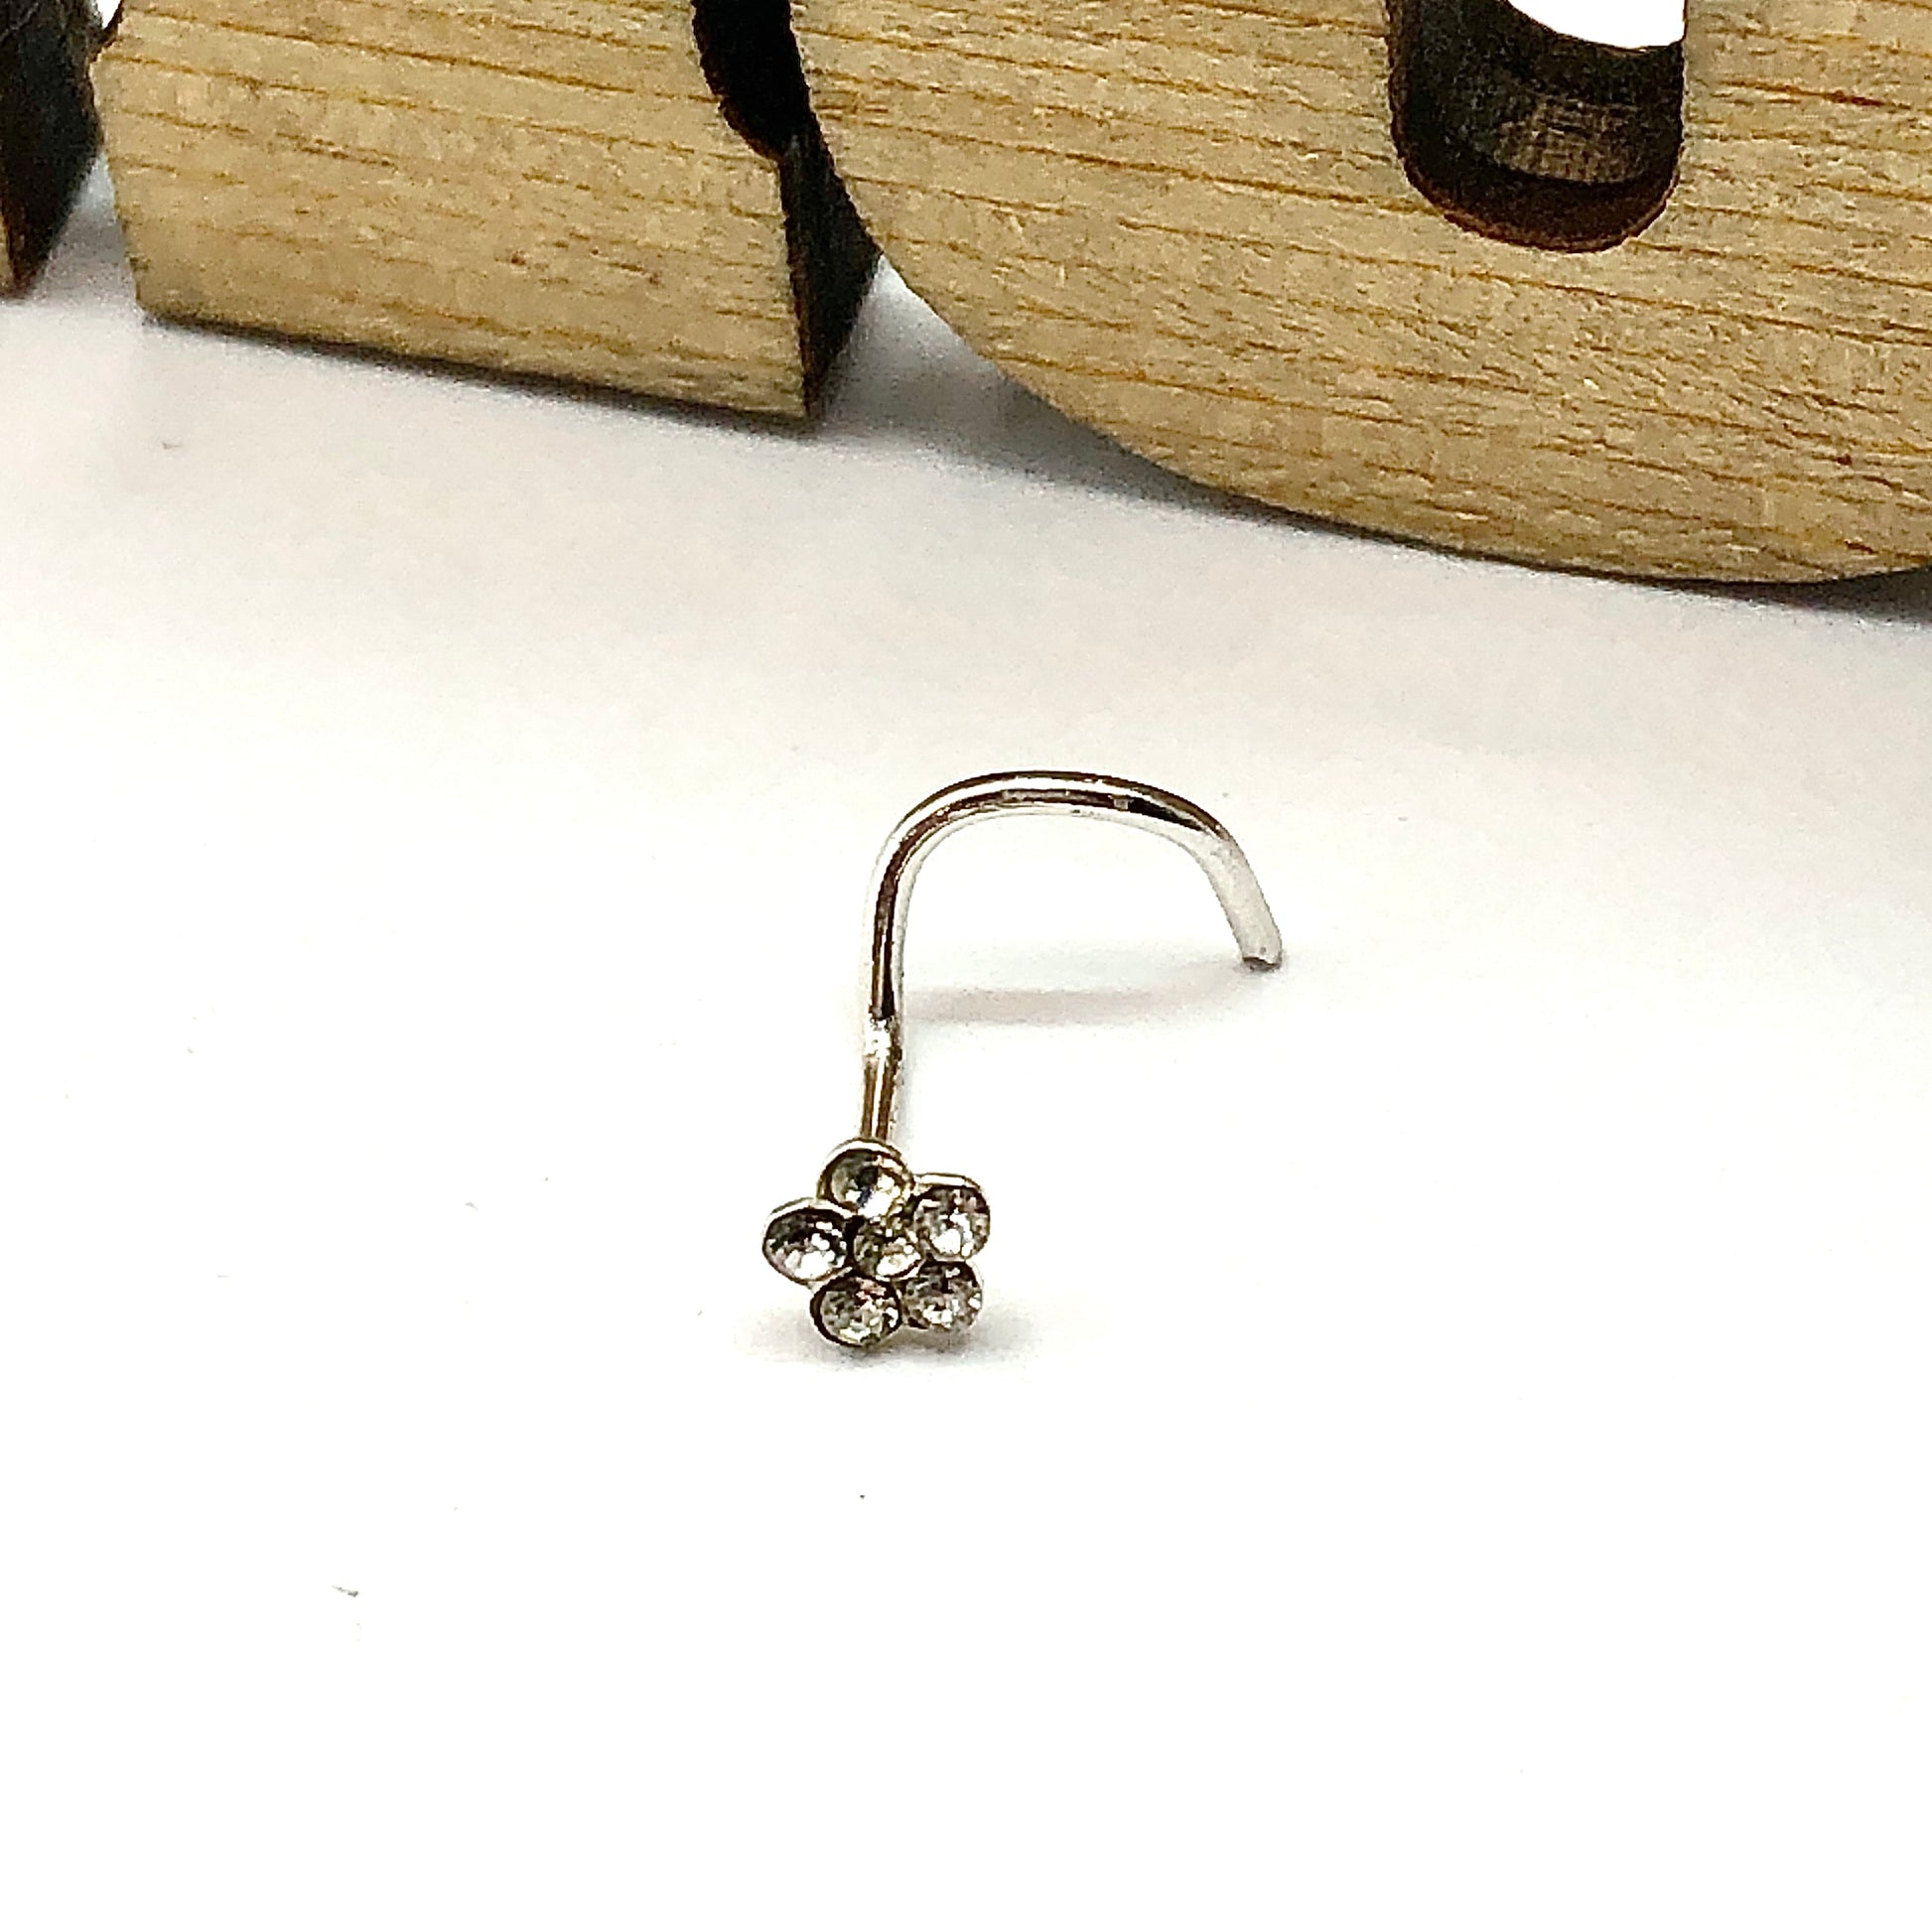 Nose Ring - Womens Sterling Silver 3mm Crystal Flower Stud Nose Ring - Corkscrew Style Nose Ring